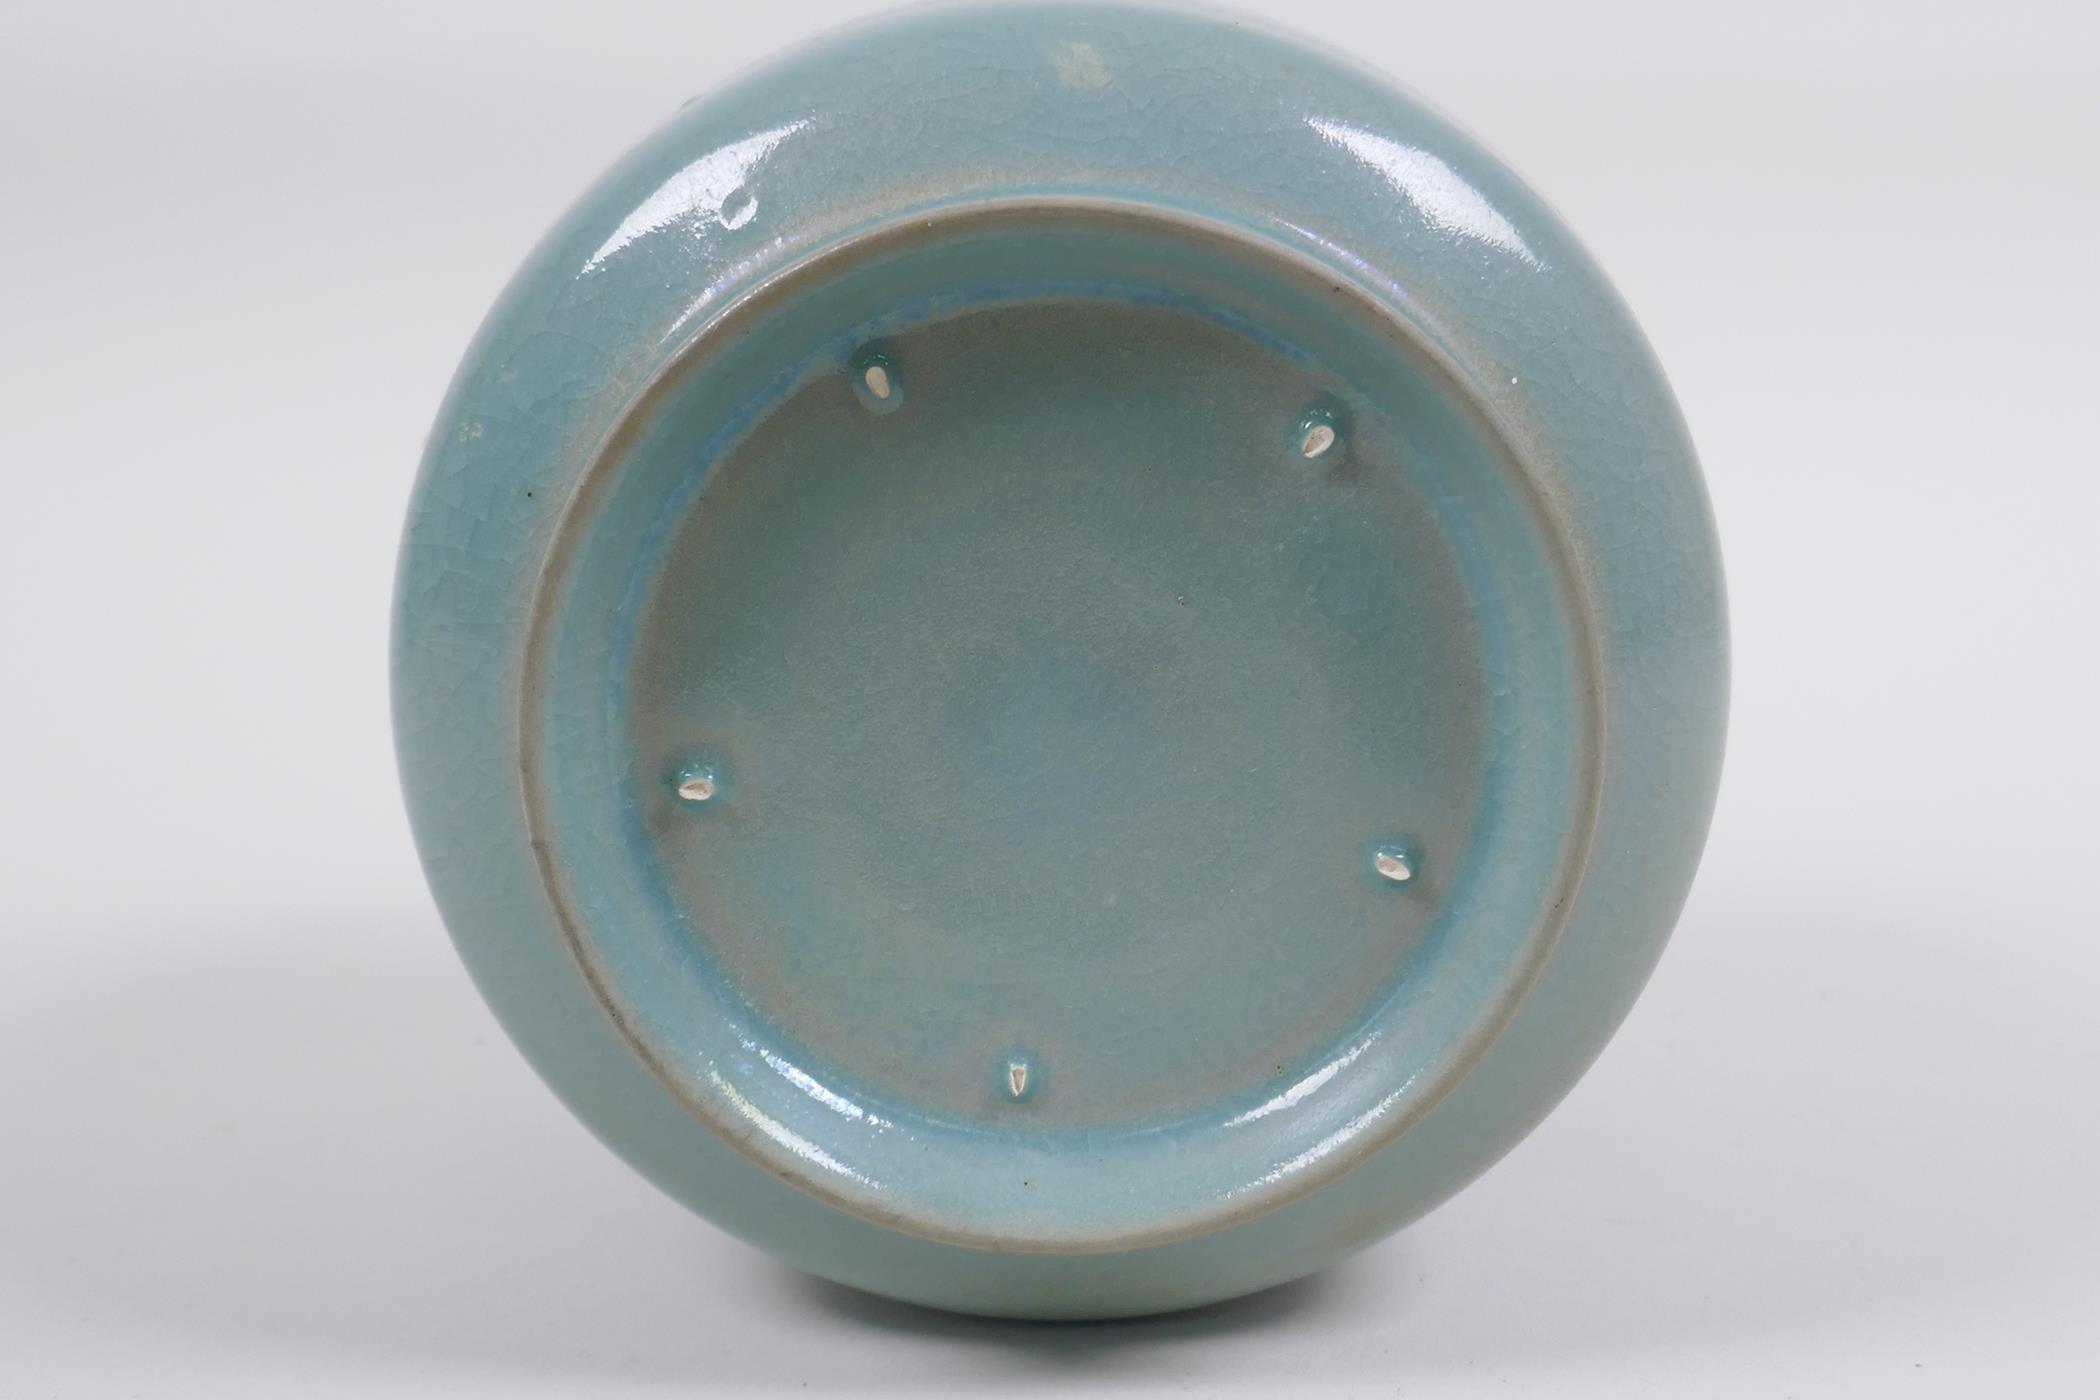 Chinese Ru ware style celadon glazed jar with twin mask decoration, 12cm high x 12cm diameter - Image 5 of 5